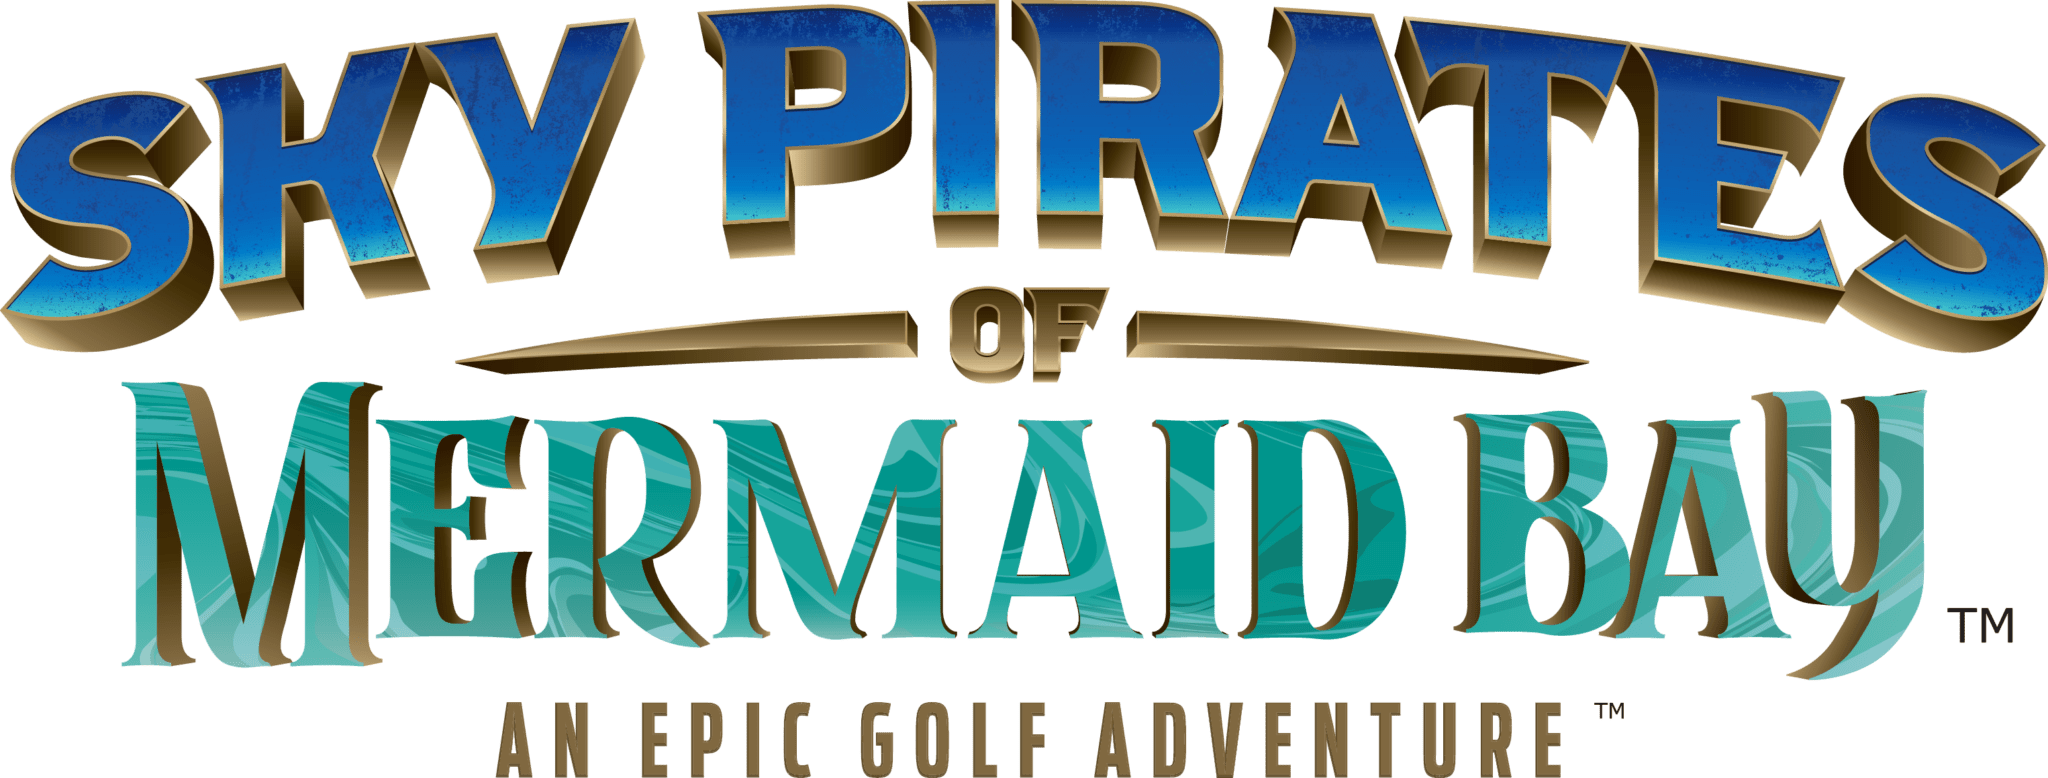 >Pirate Course at Sky Pirates of Mermaid Bay Mini Golf in Pigeon Forge, TN Logo